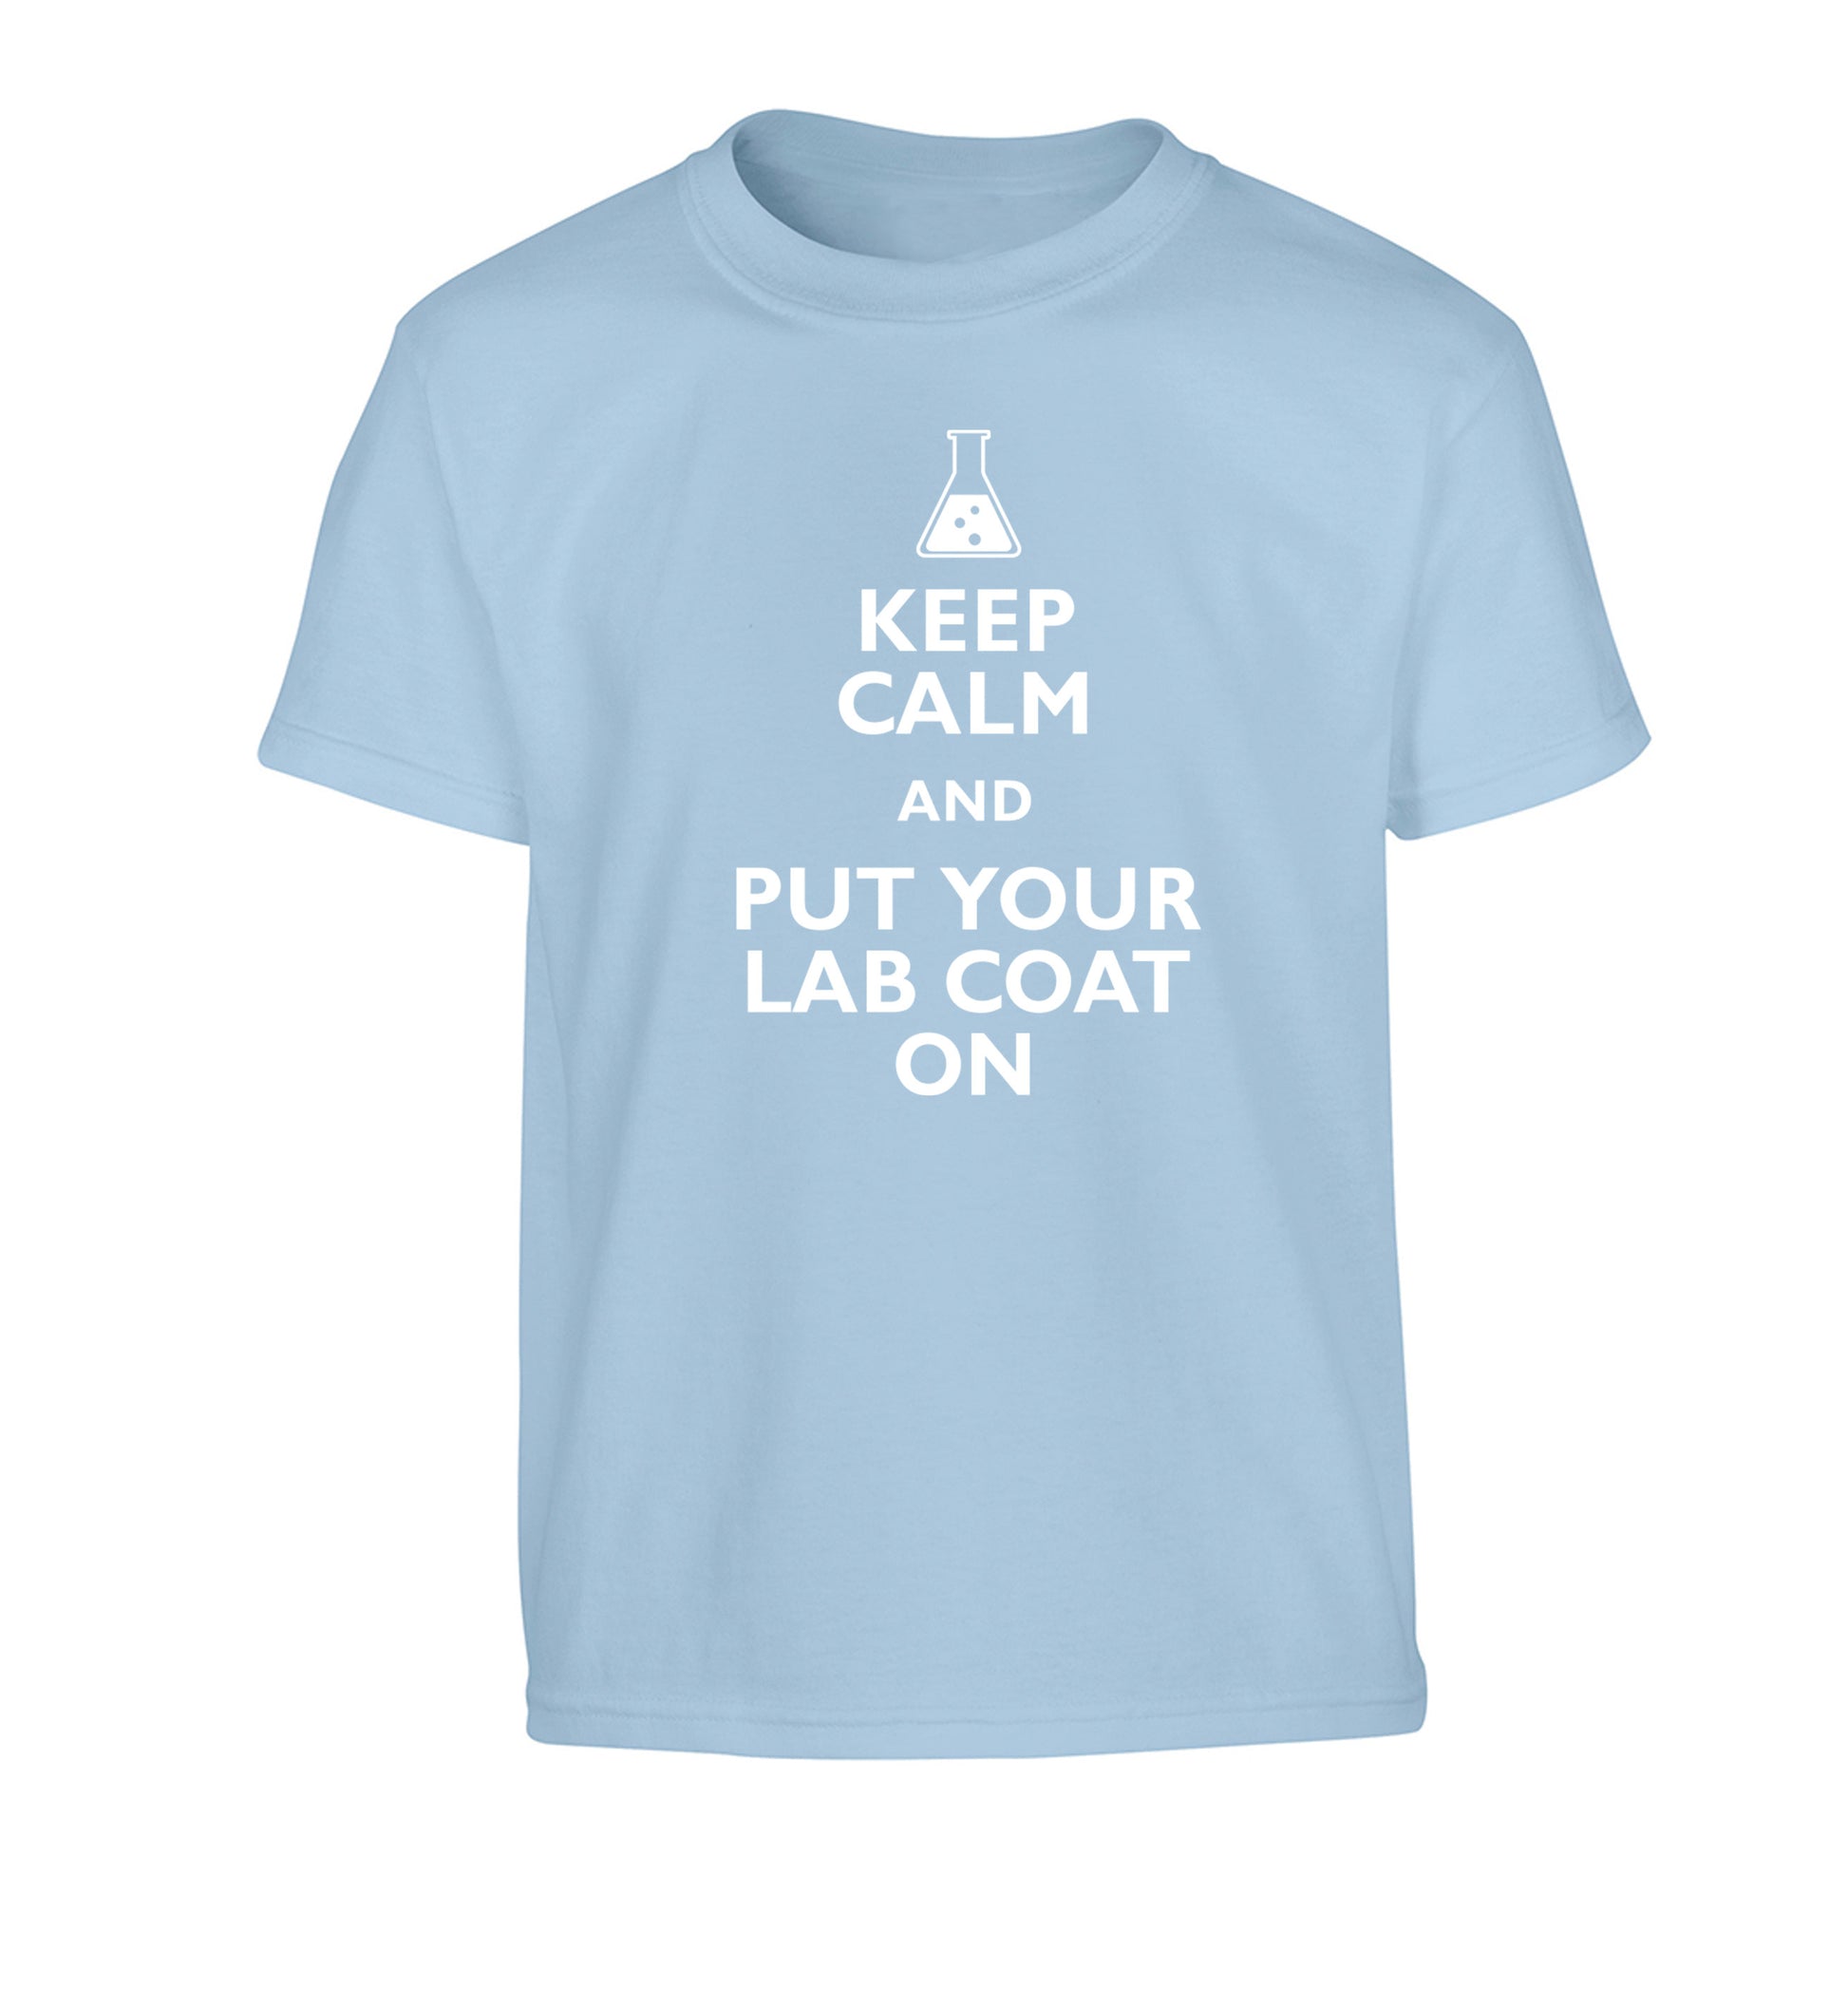 Keep calm and put your lab coat on Children's light blue Tshirt 12-14 Years